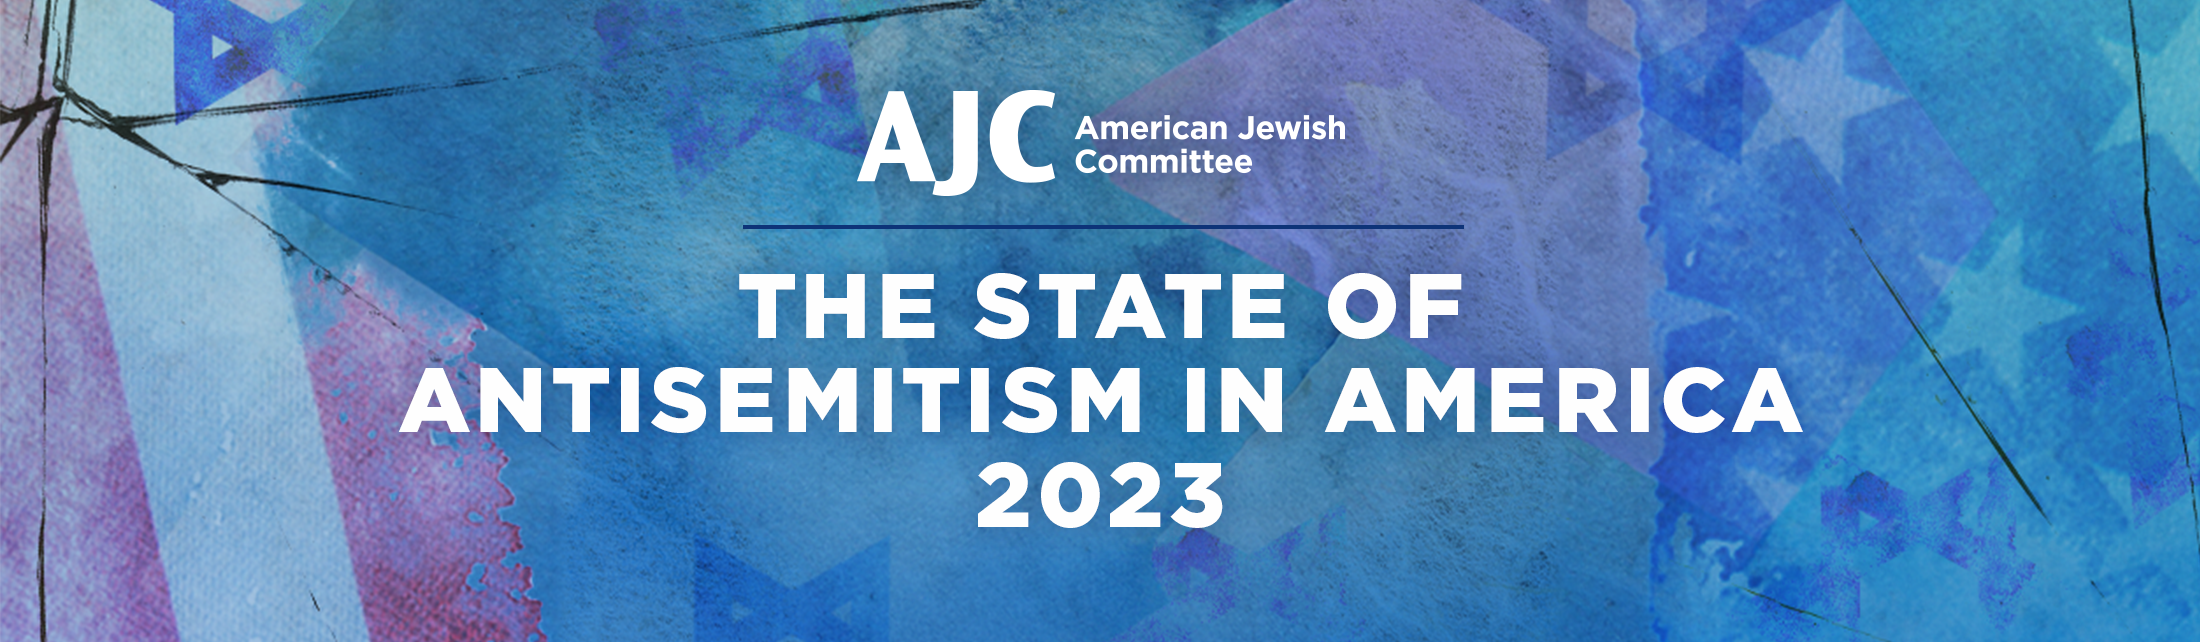 AJC's State of Antisemitism in America 2023 Report